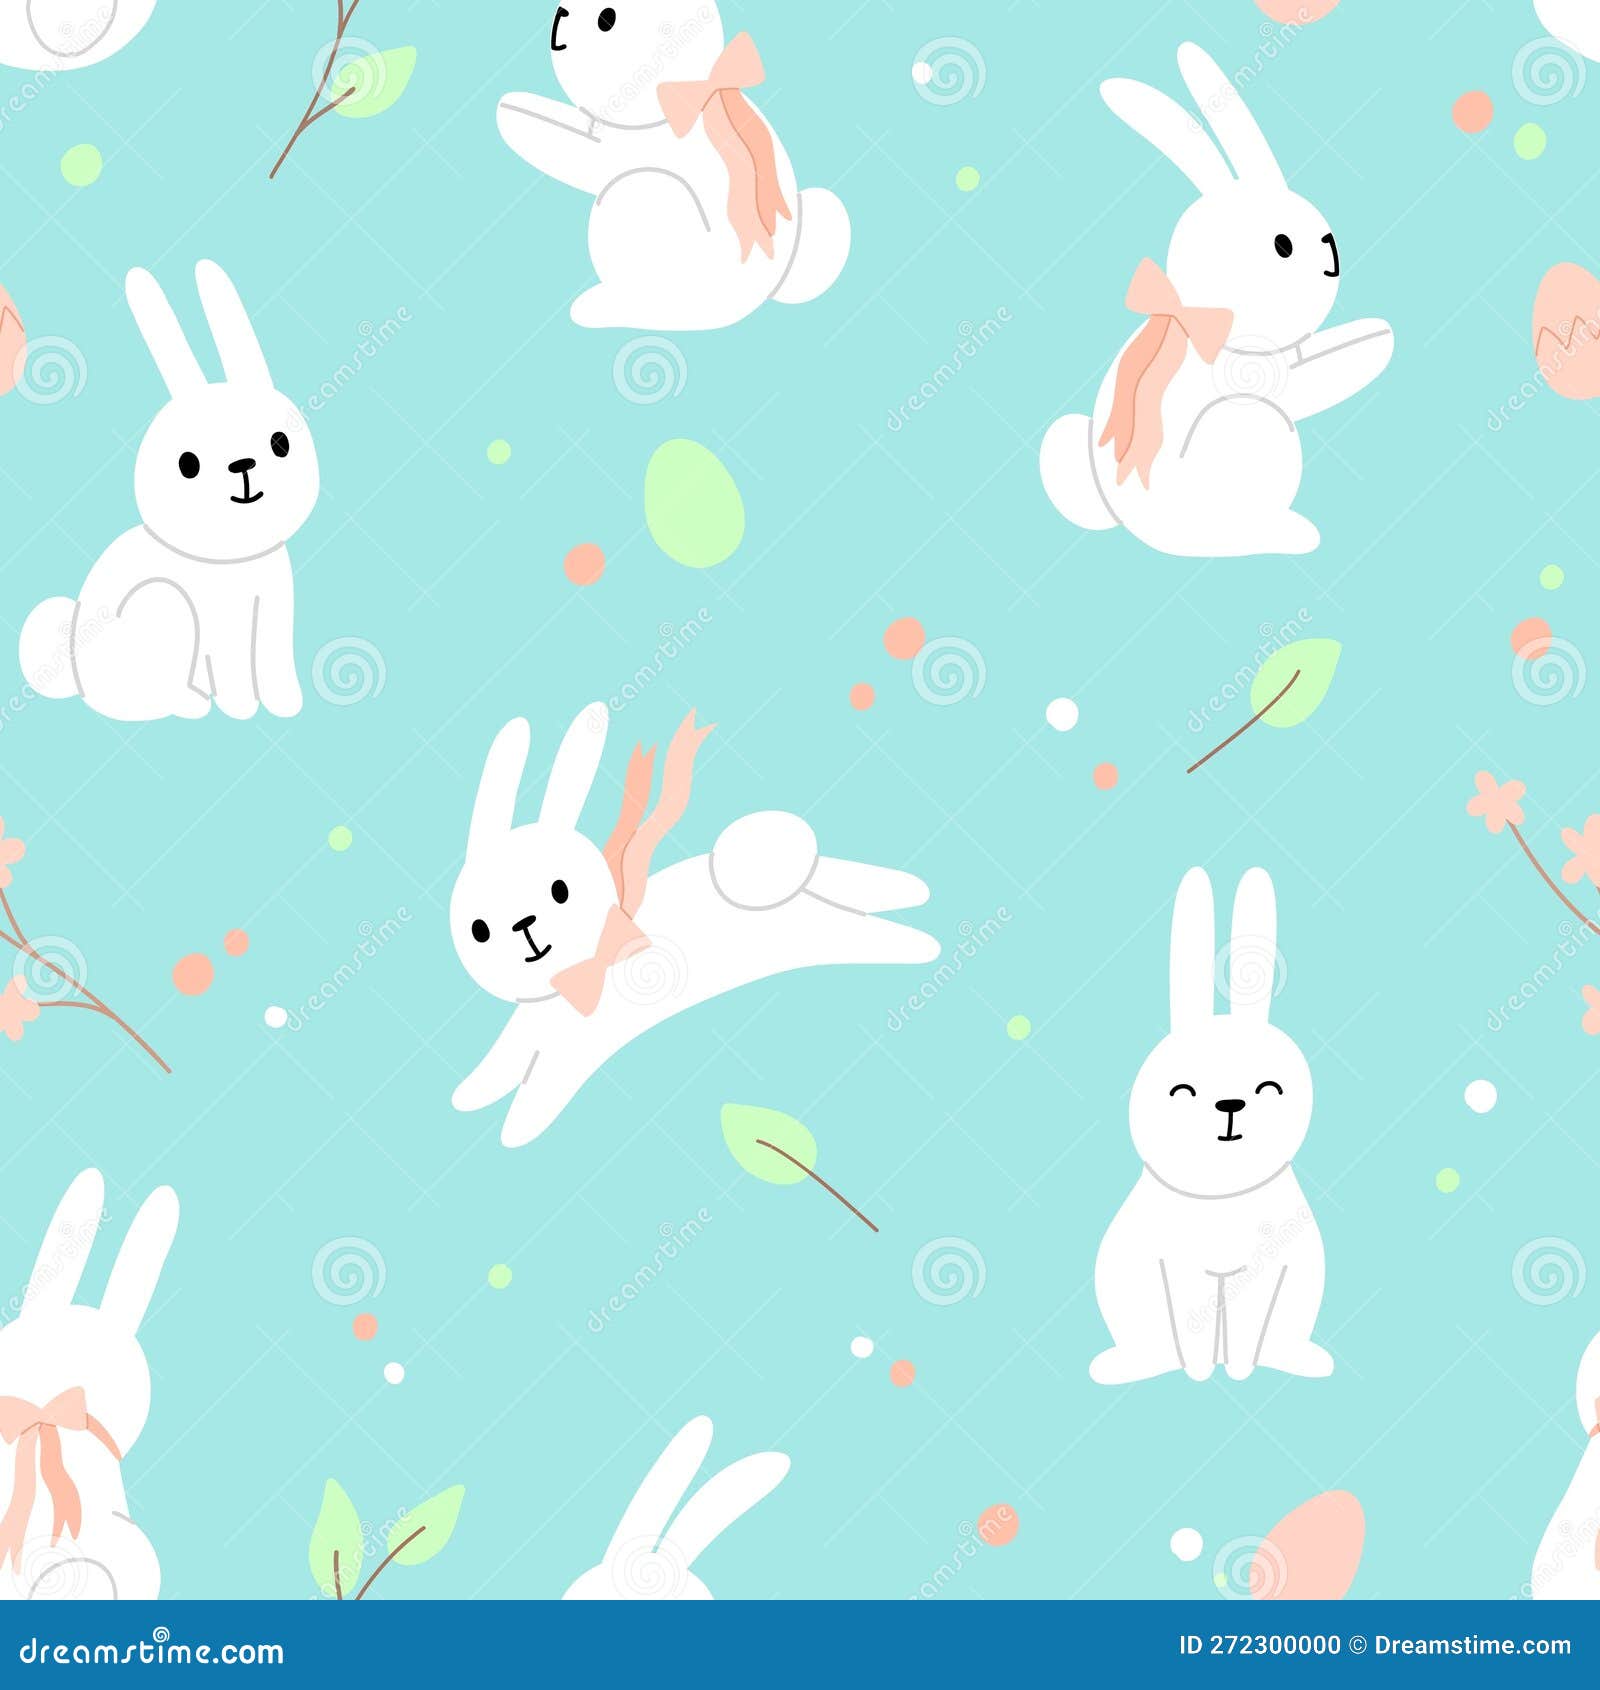 Cute white rabbit pattern stock vector. Illustration of character ...